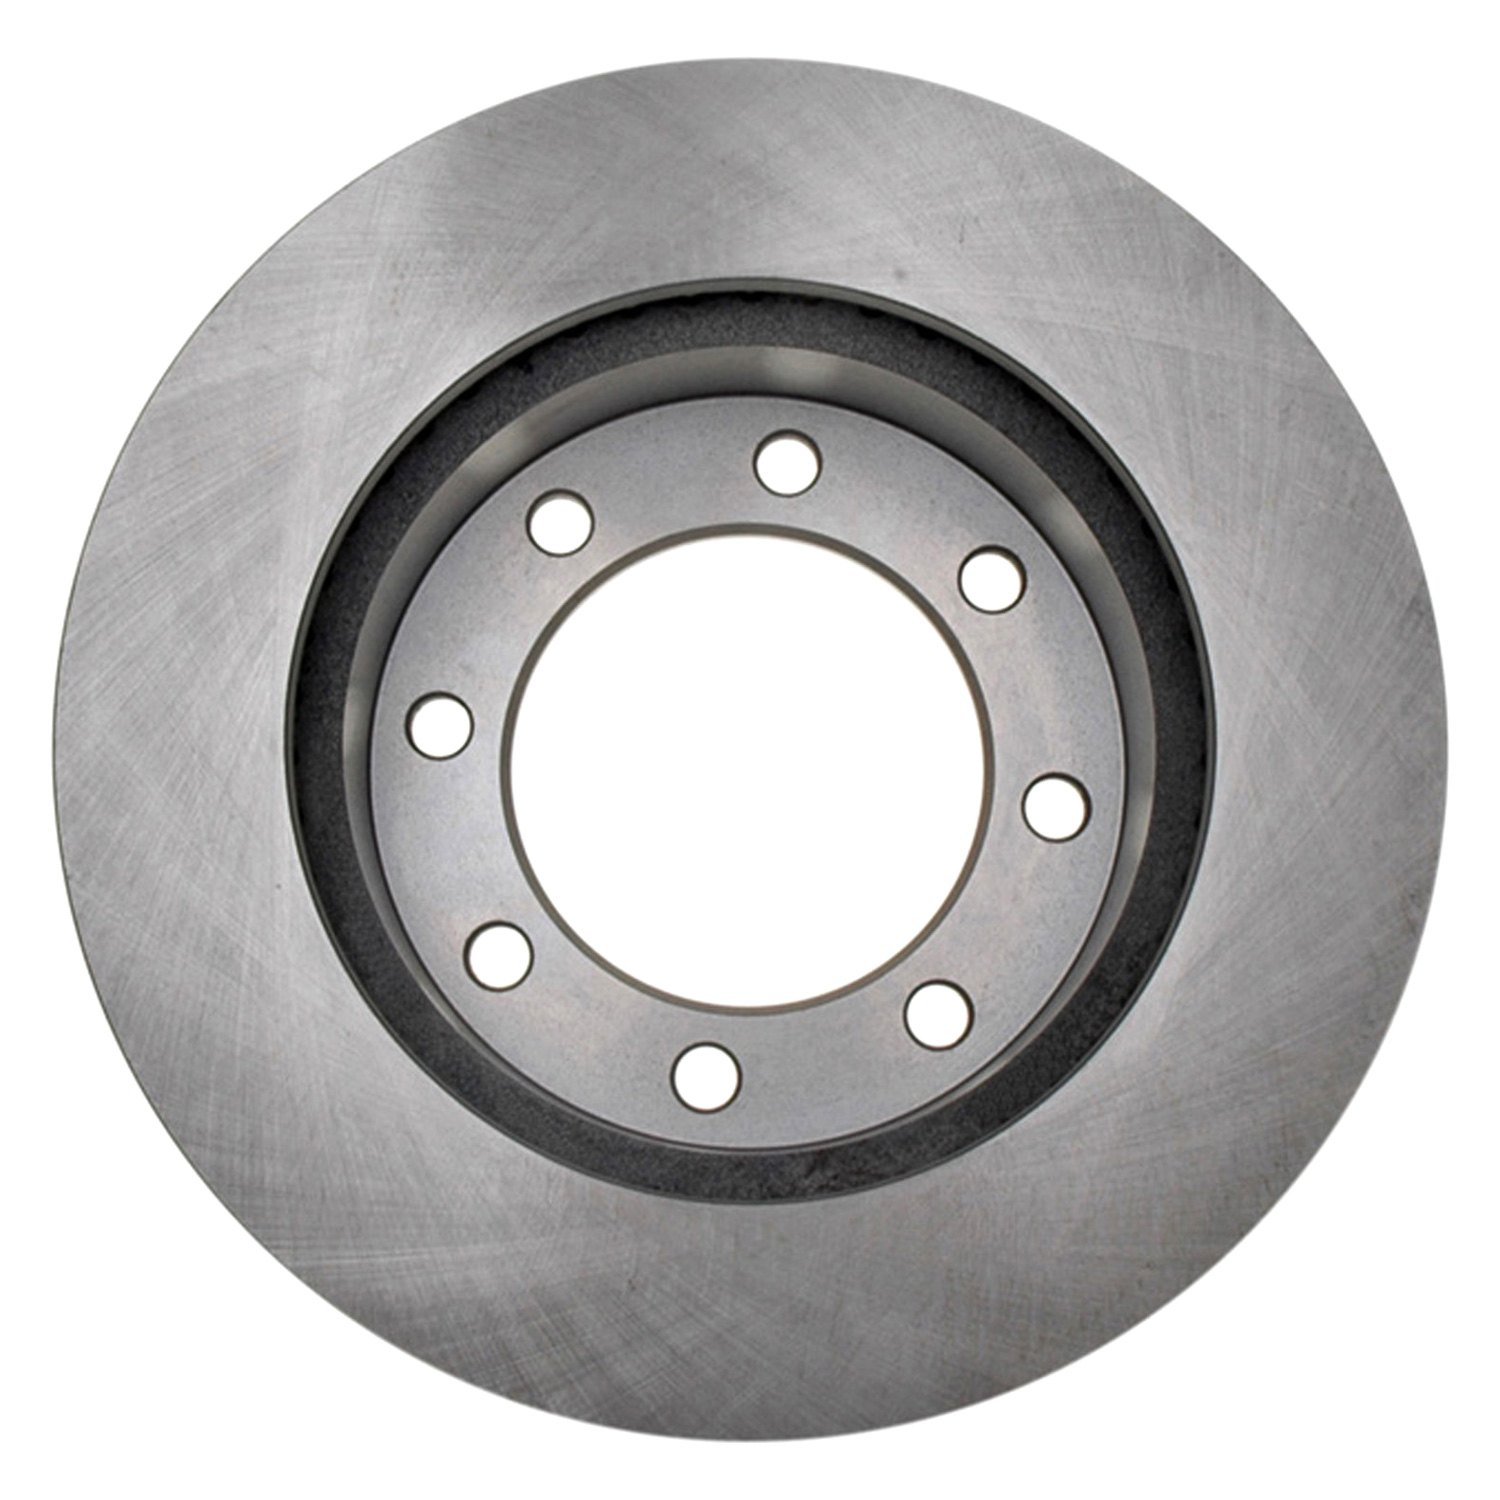 For Ford F-250 Super Duty 05-12 ACDelco Advantage Vented Front Brake Ford F250 Brake Rotor Minimum Thickness